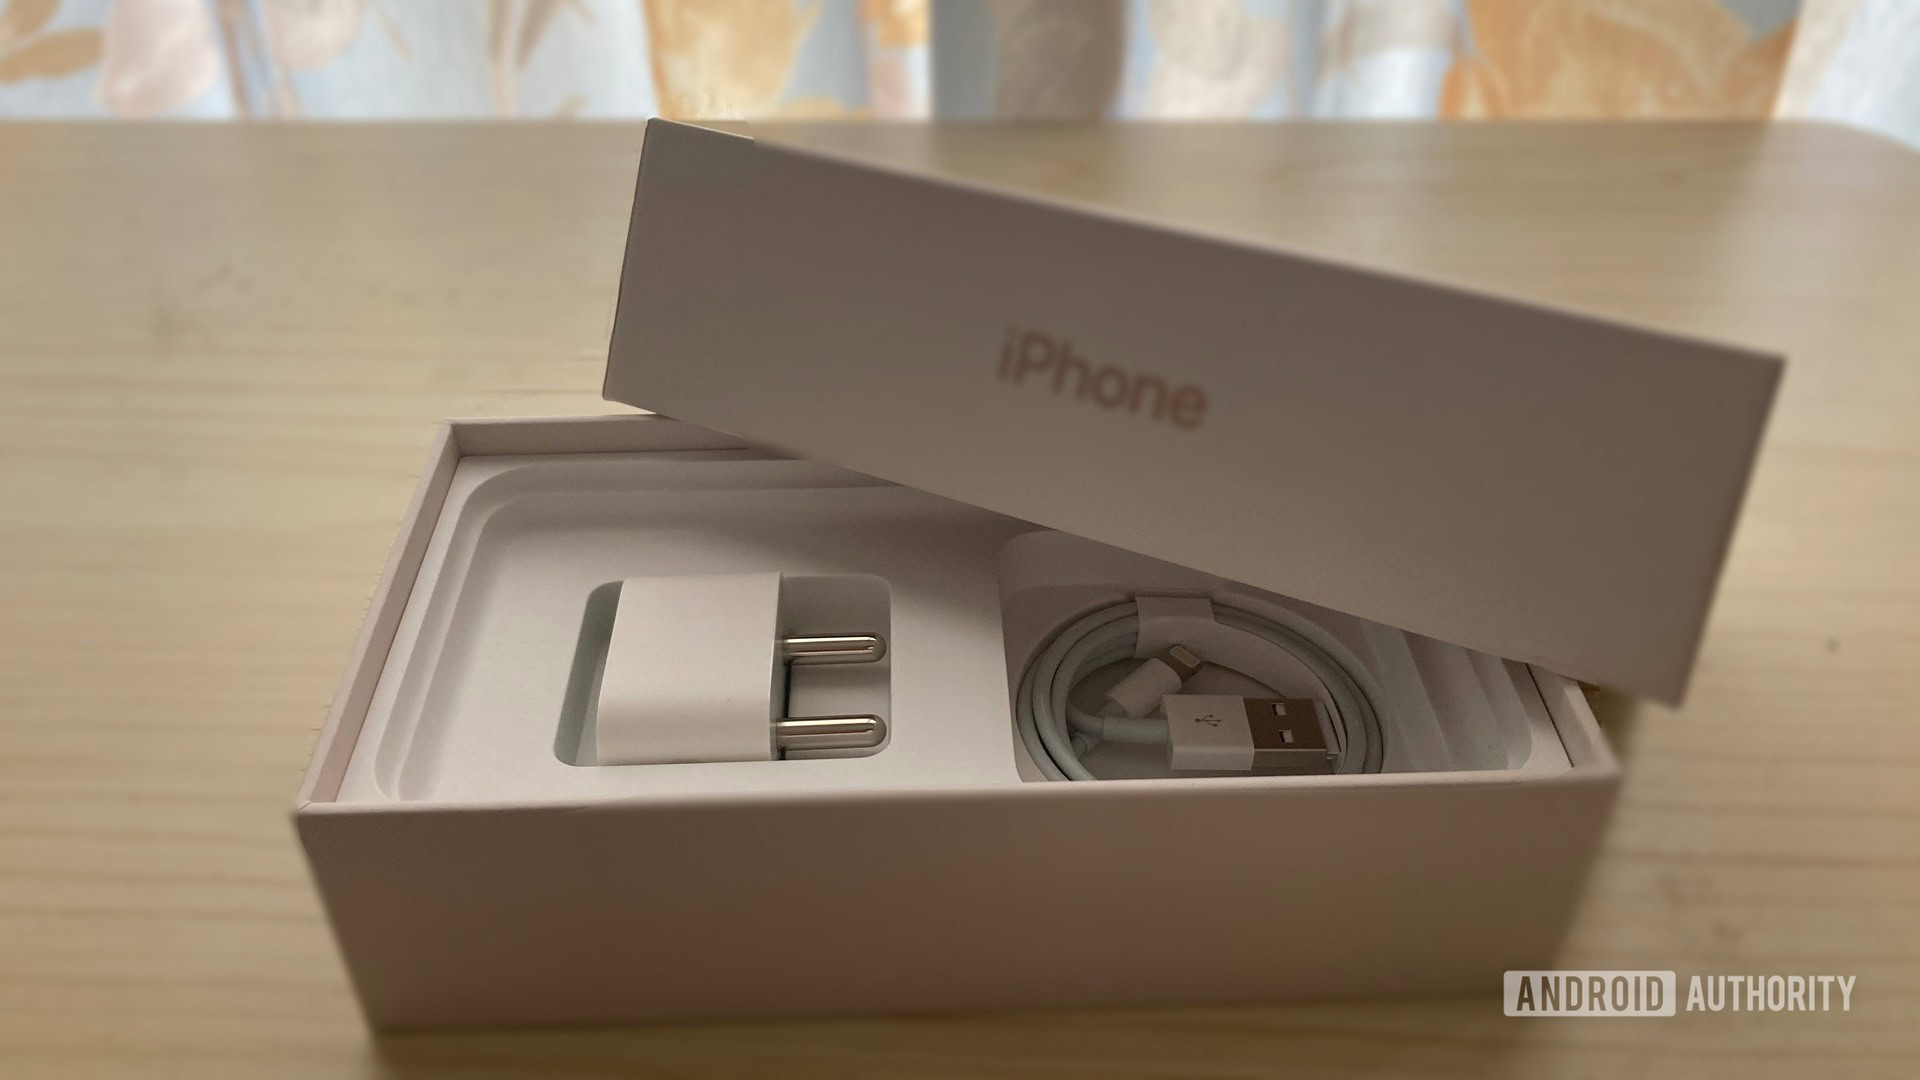 Apple To Drop The Power Adapter From Iphone 12 Box Is It The Right Move